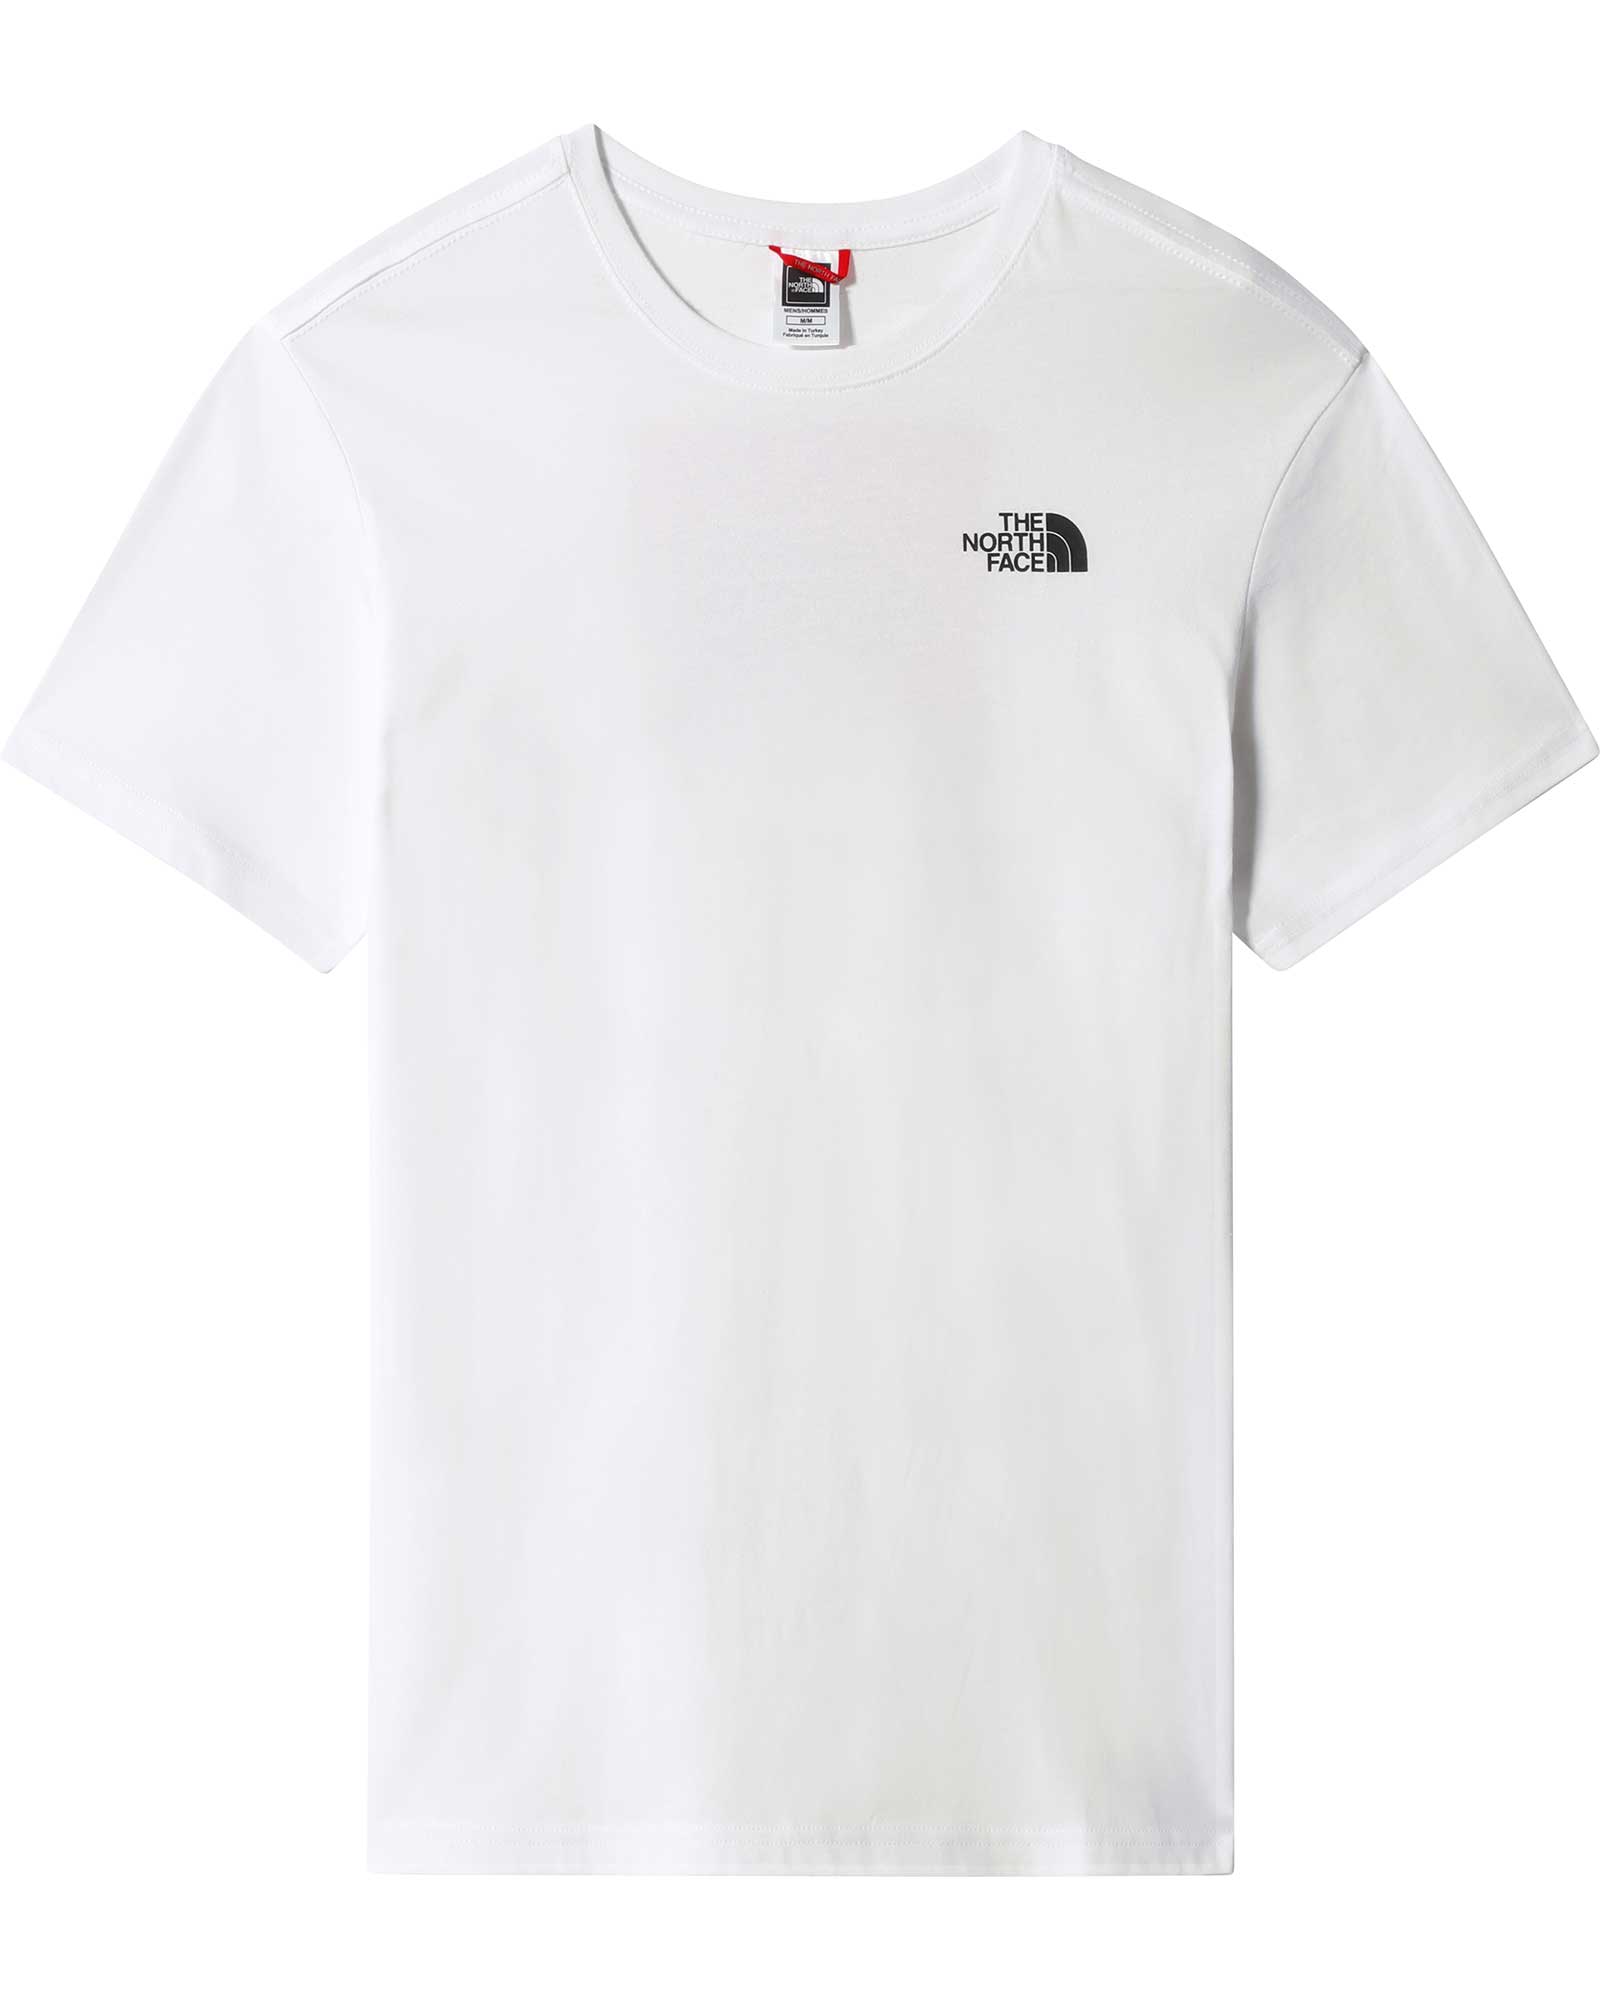 The North Face Red Box Men’s T Shirt - TNF White XL